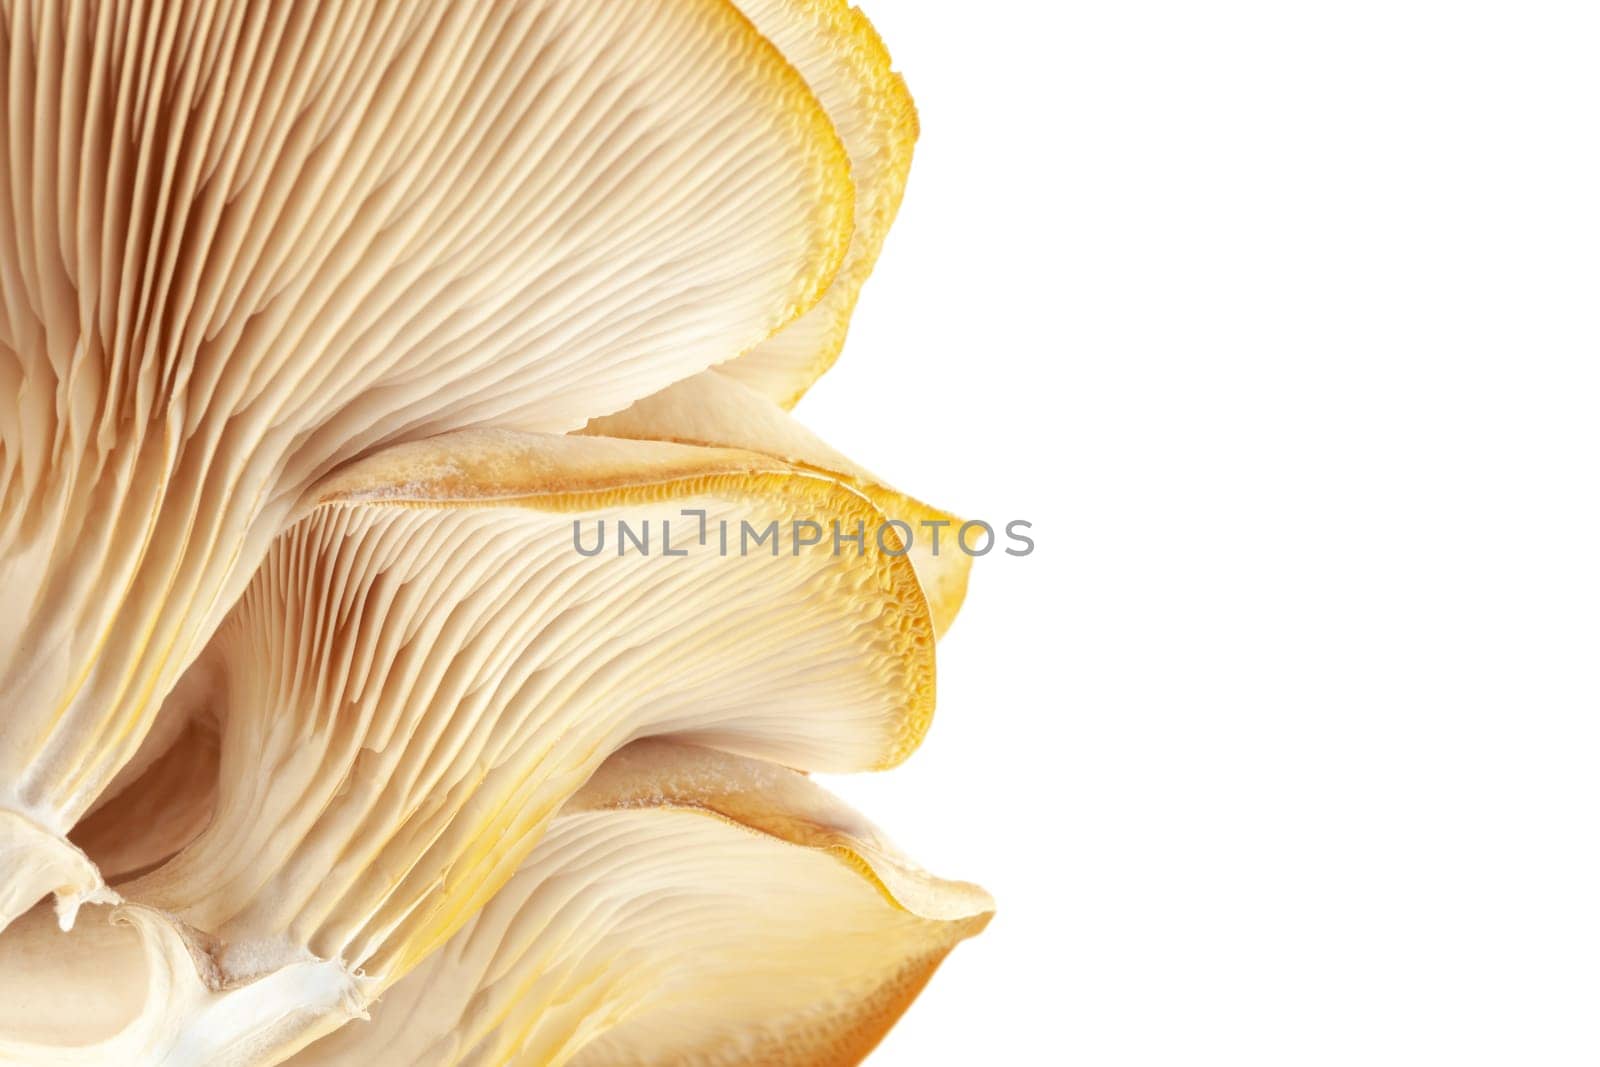 oyster mushroom close up isolated on white background by glavbooh